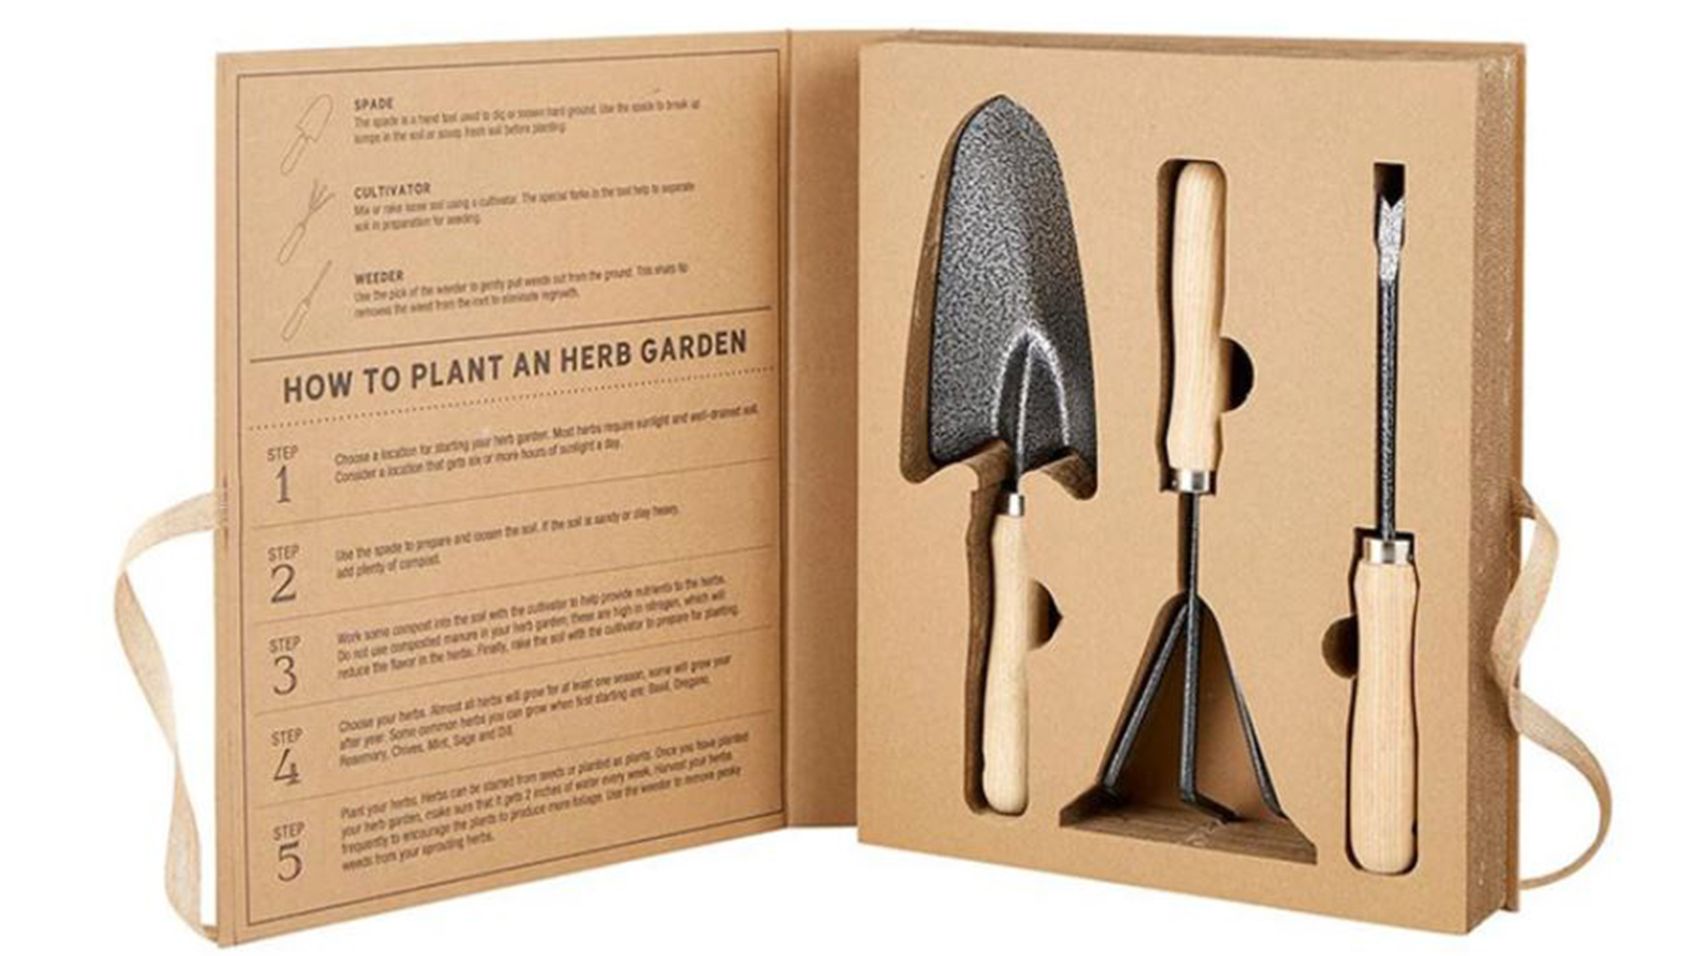 25 Mother's Day gardening gifts for moms with a green thumb